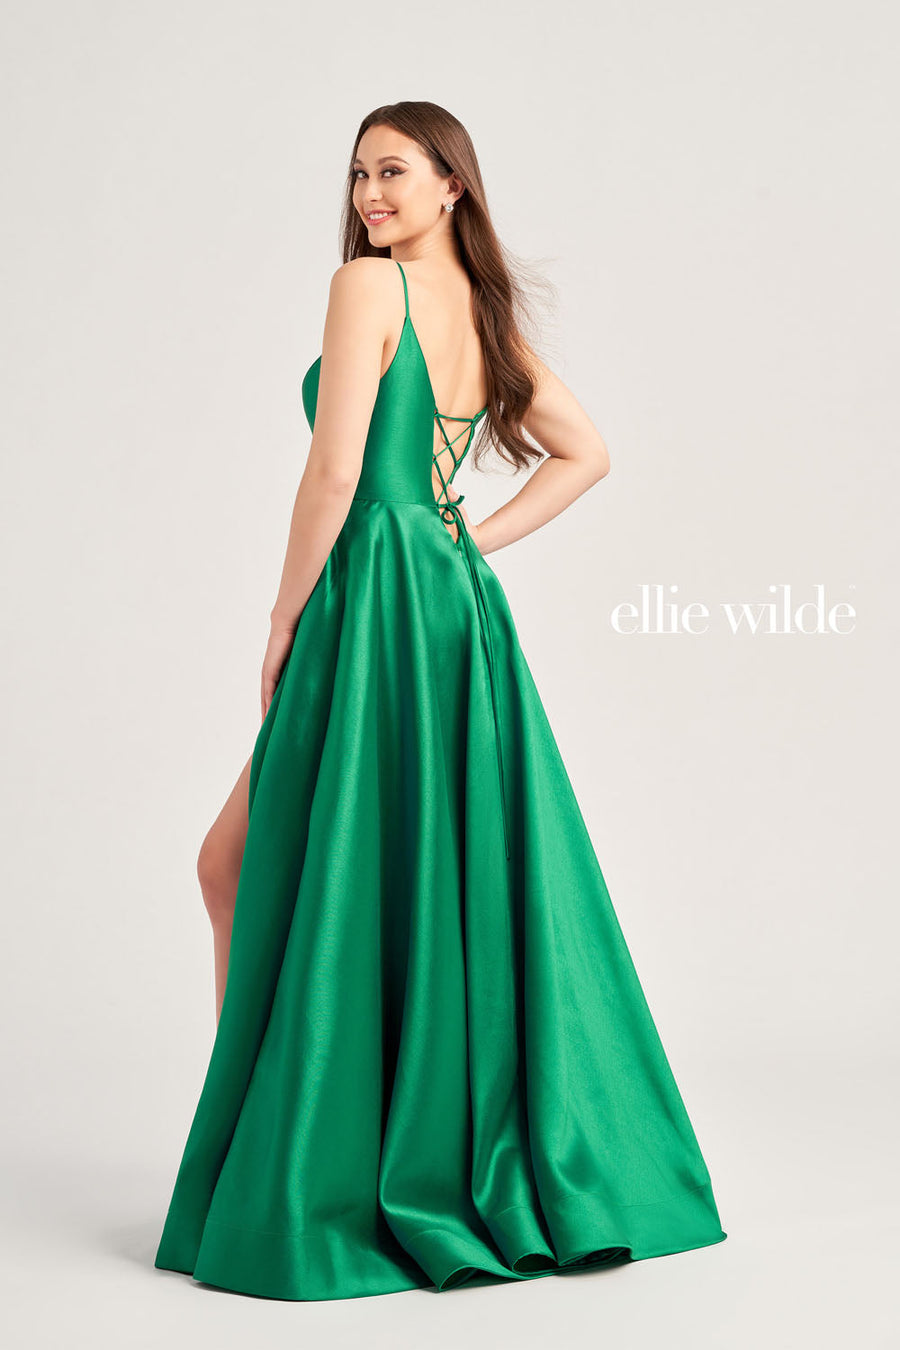 Ellie Wilde EW35232 prom dress images.  Ellie Wilde EW35232 is available in these colors: Emerald, Navy Blue, Teal, Royal Blue, Magenta.